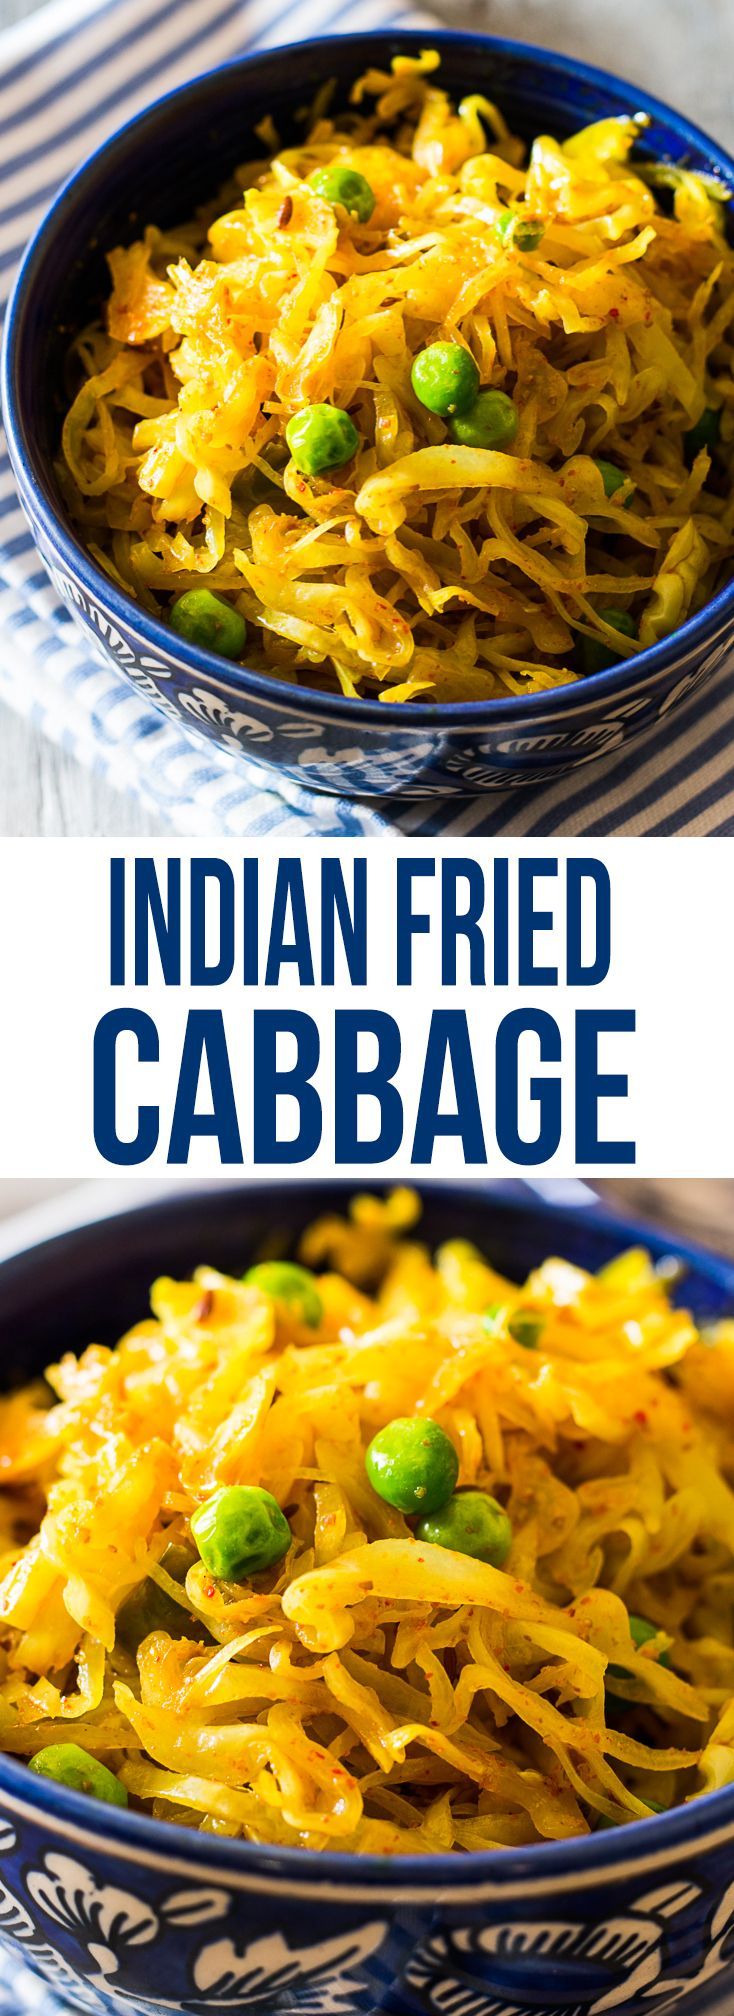 Indian Fried Cabbage -   15 indian recipes easy ideas